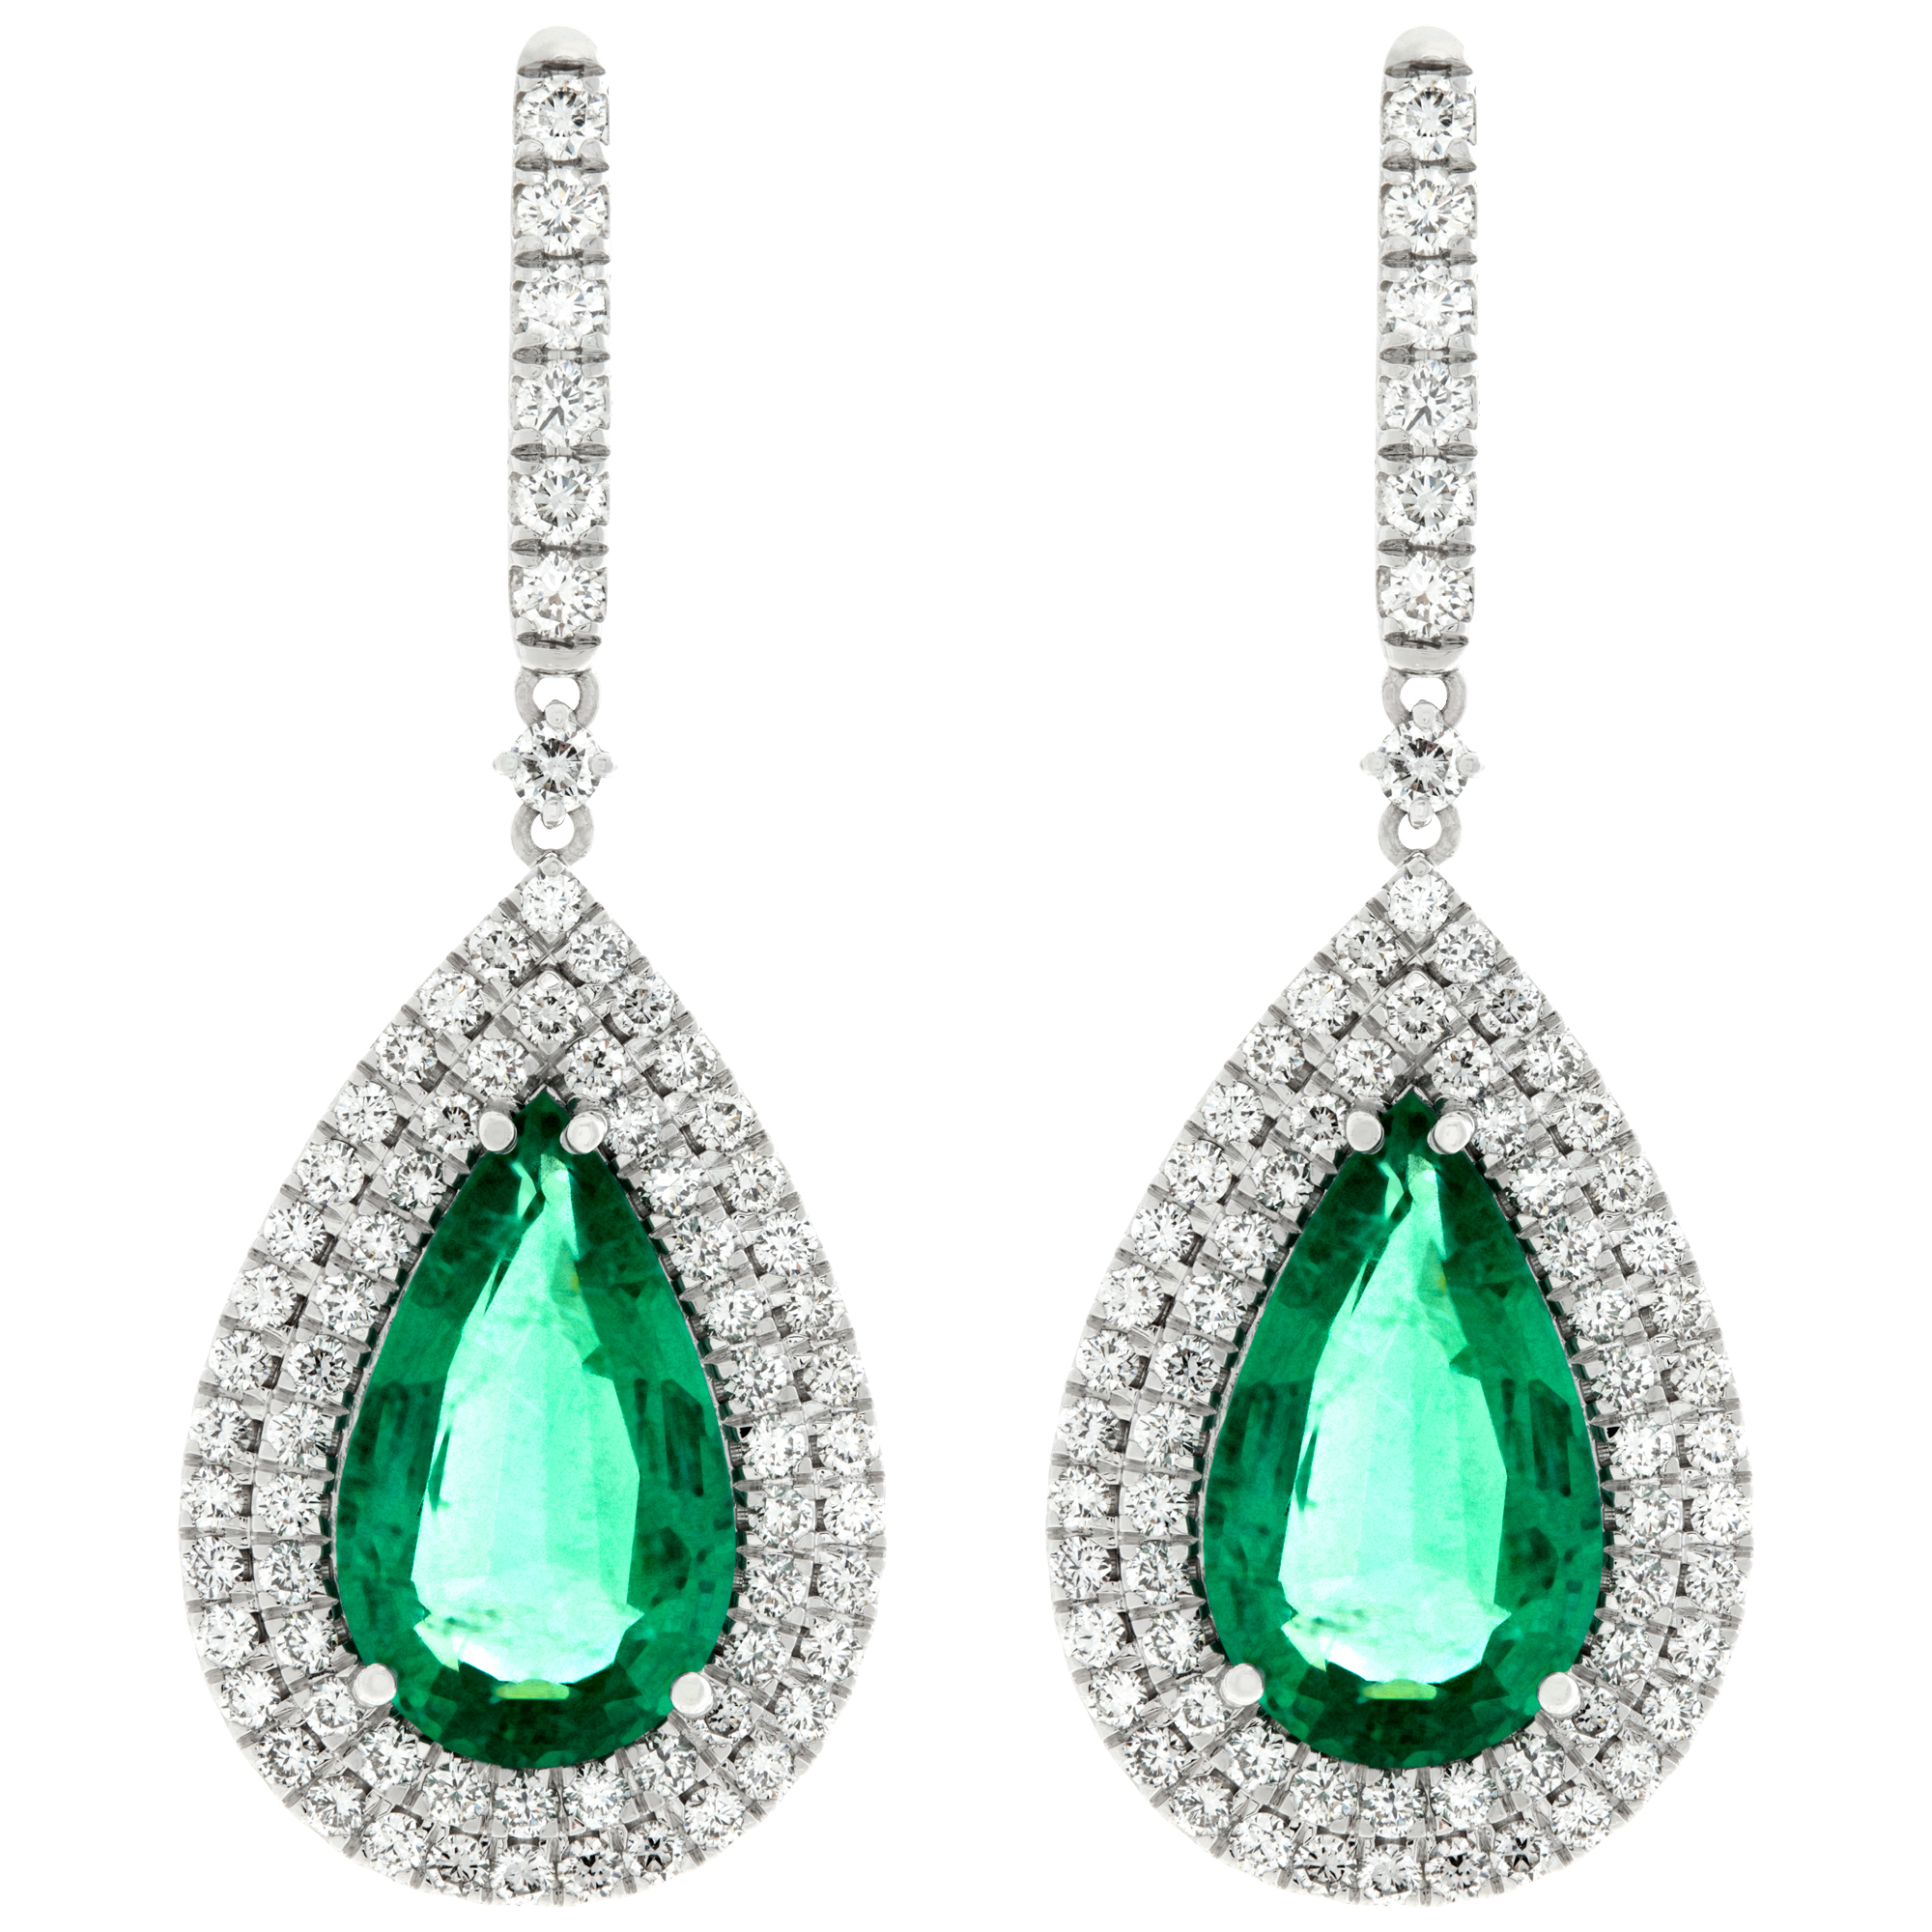 Emerald and diamond earrings in 18k white gold